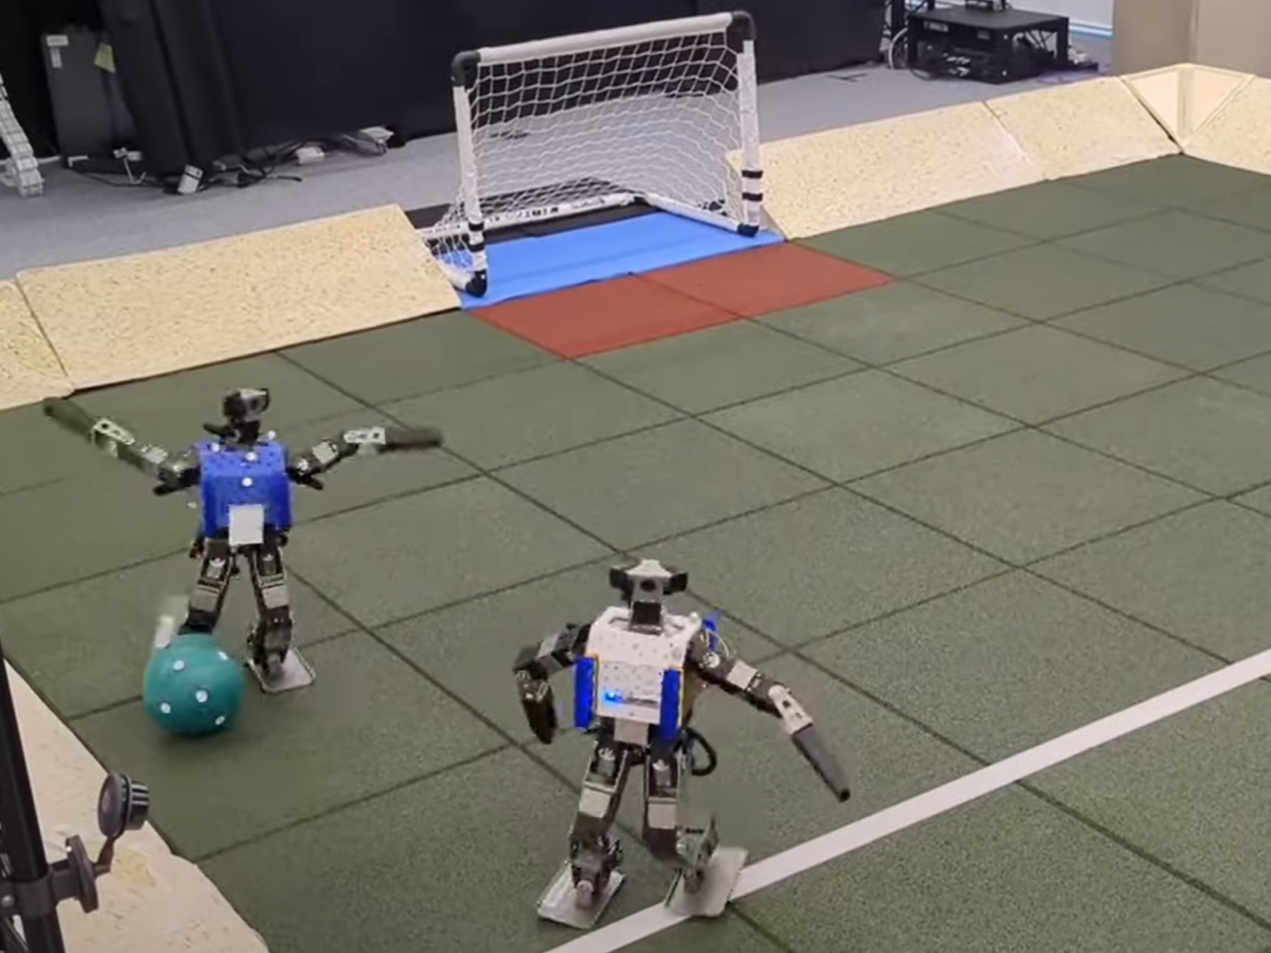 AI robots figure out how to play football in shambolic footage The